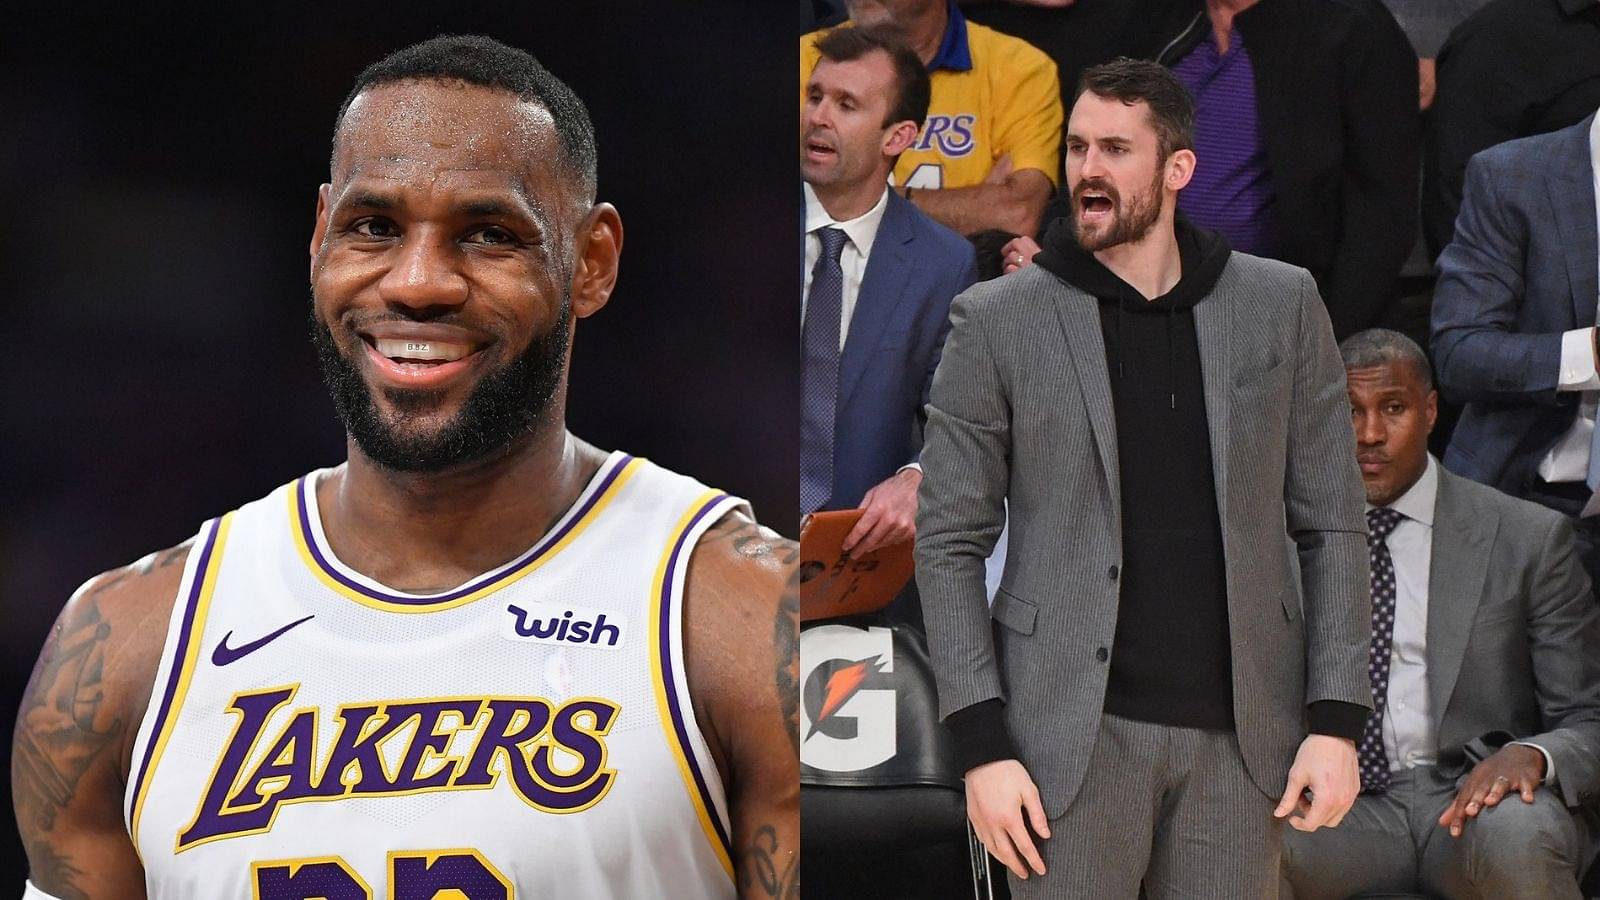 "Despite earning over $1 billion in his career, LeBron James never uses phone data": Kevin Love tells the world that Lakers star is the most frugal player he knows